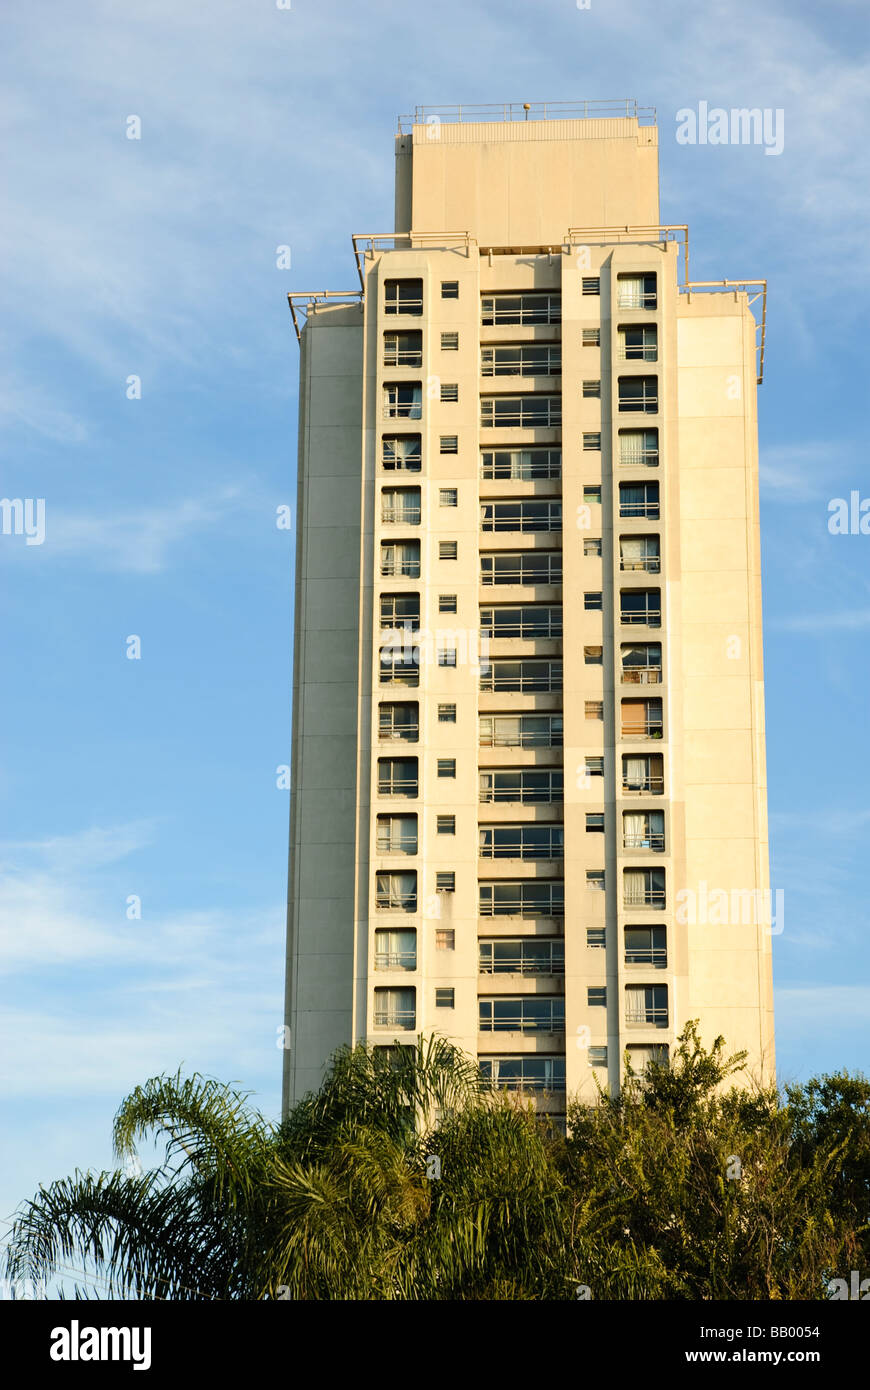 Housing commission social housing project: high rise living. Stock Photo